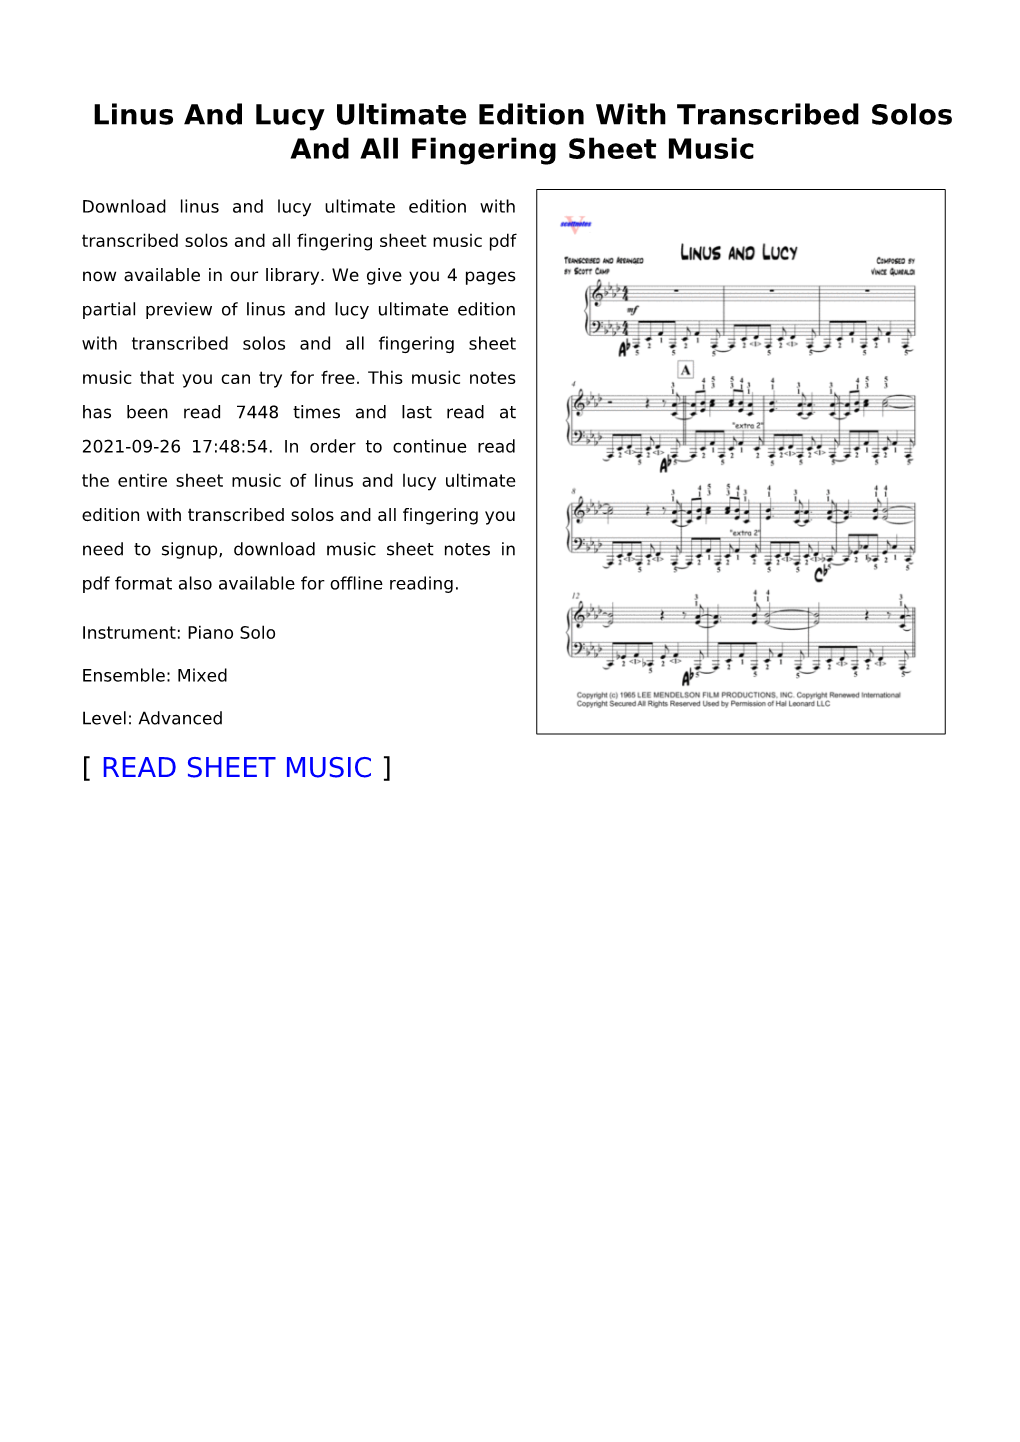 Linus and Lucy Ultimate Edition with Transcribed Solos and All Fingering Sheet Music